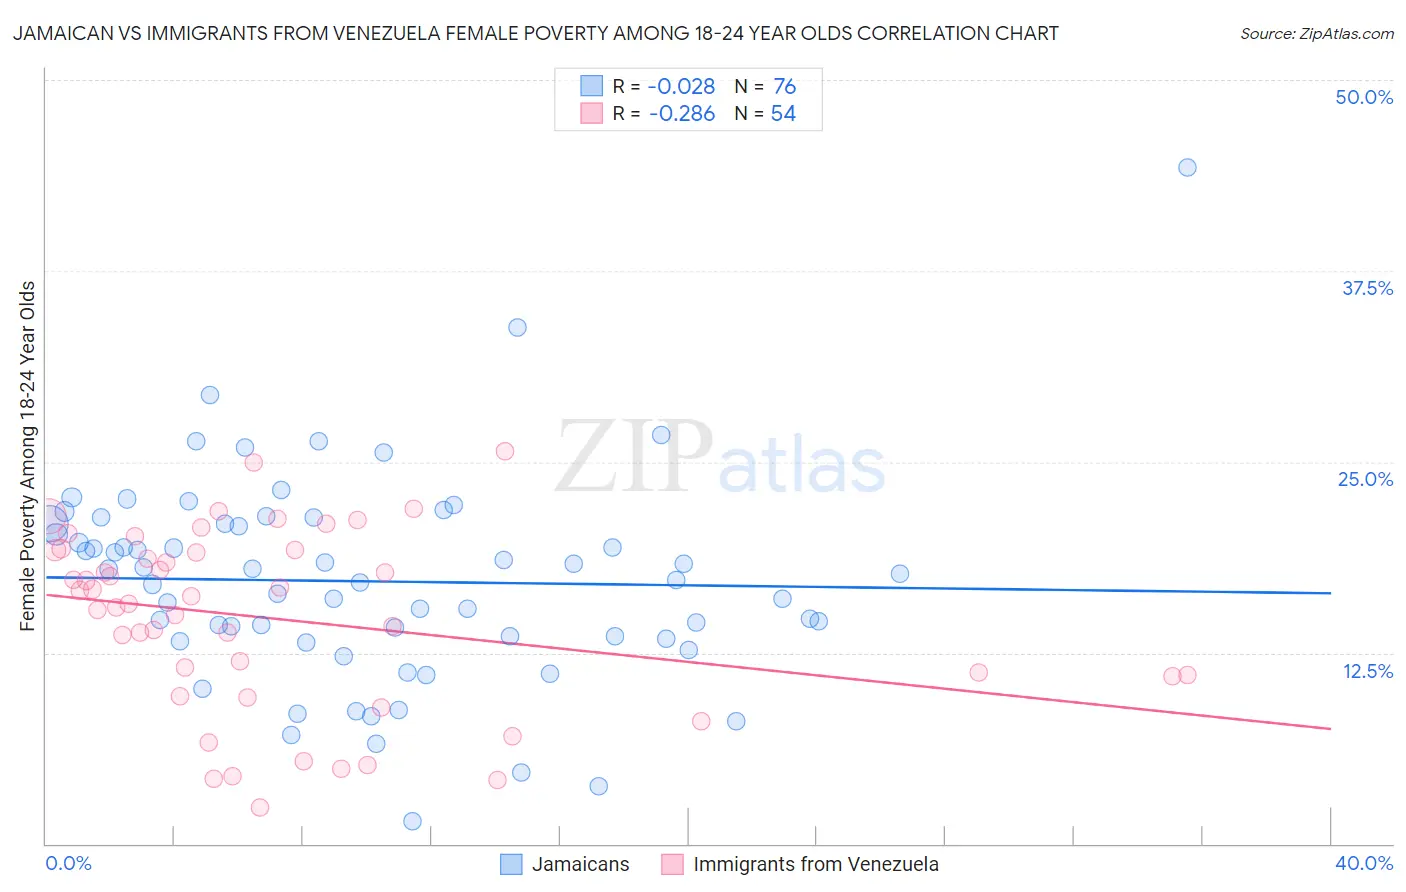 Jamaican vs Immigrants from Venezuela Female Poverty Among 18-24 Year Olds